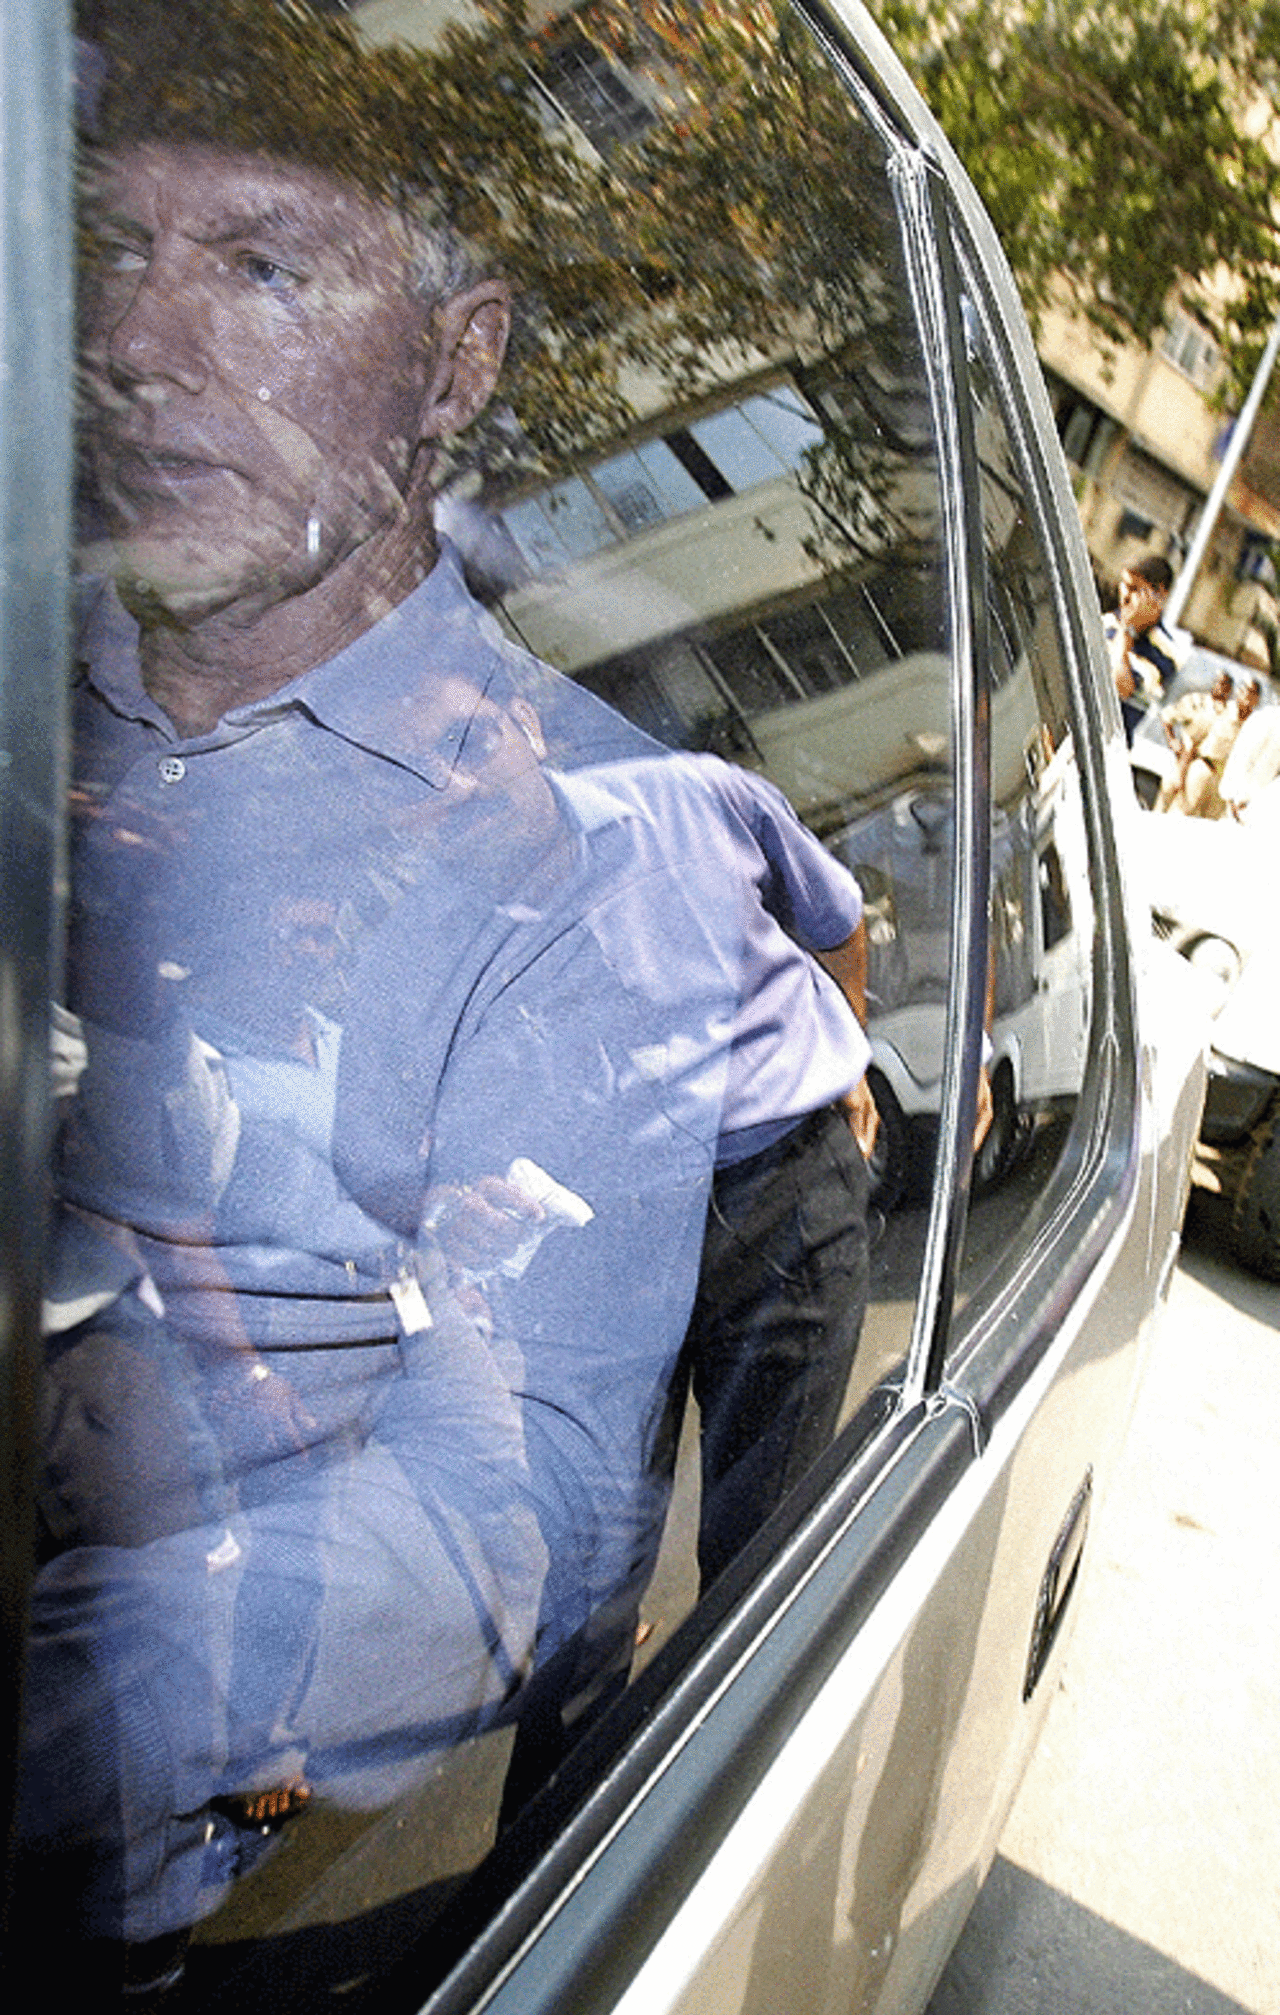 Greg Chappell arrives at the Indian board meeting to discuss the team's early exit in the World Cup, Mumbai, April 6, 2007